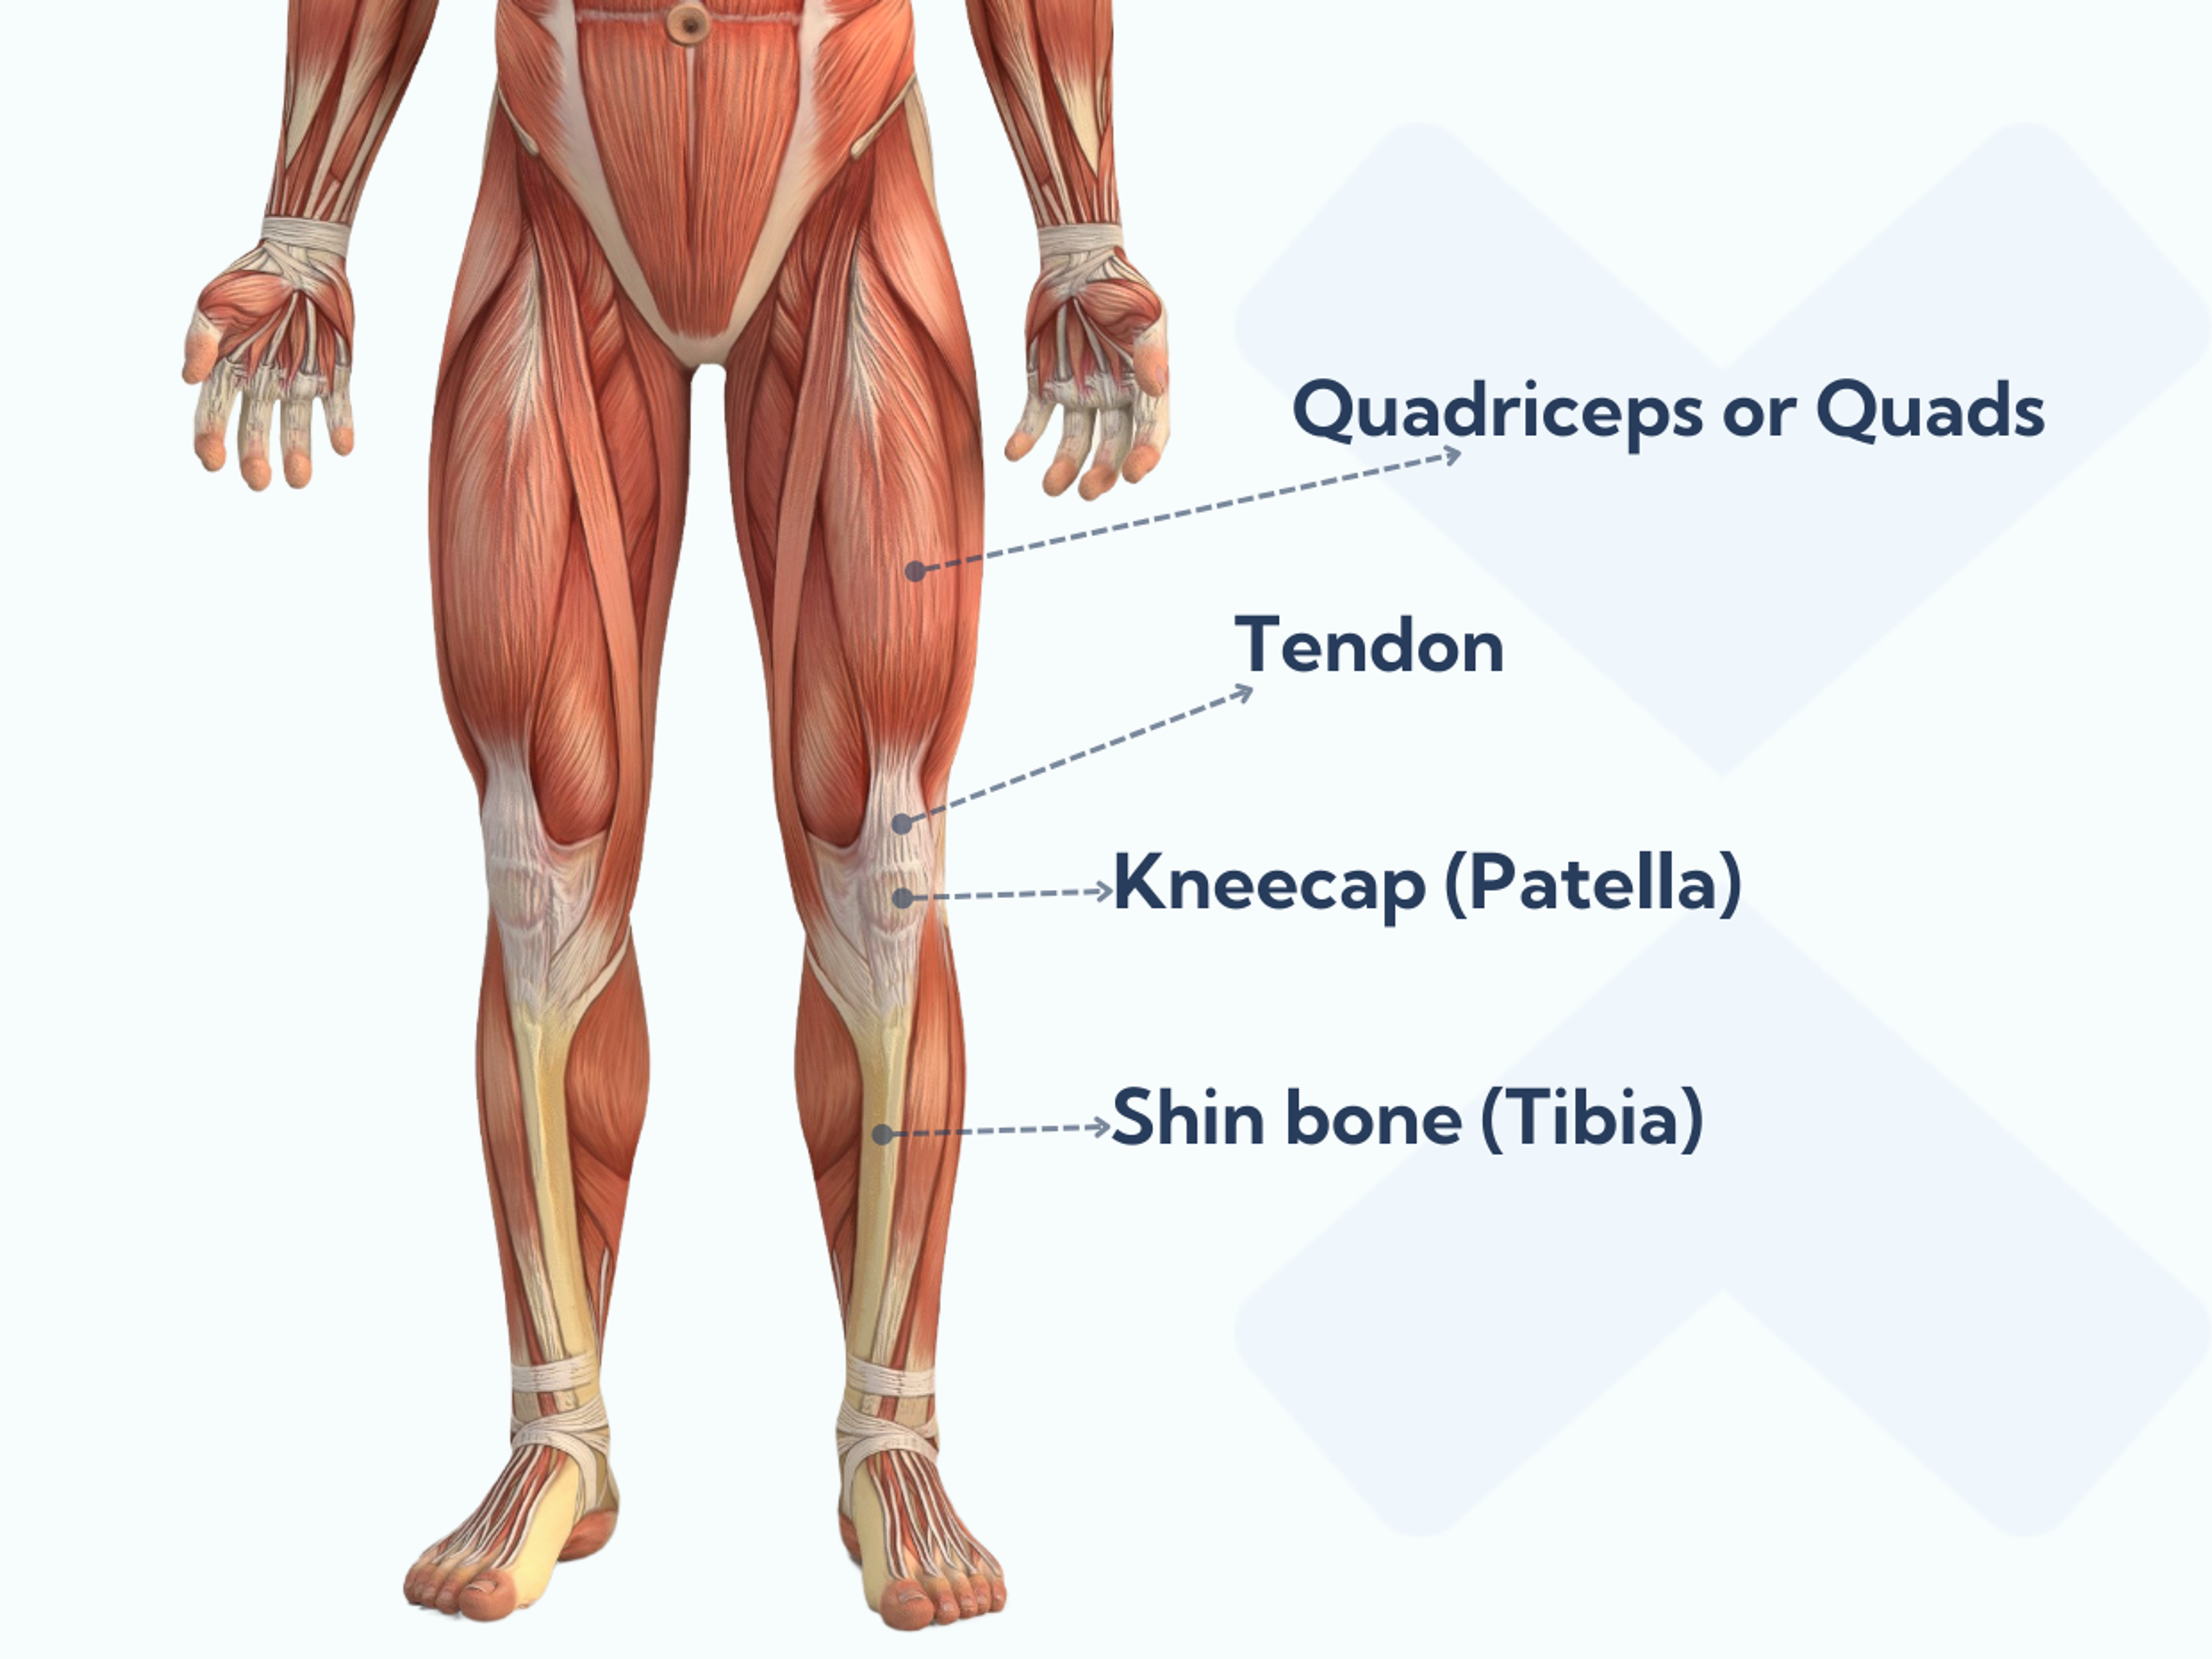 The kneecap sits inside the quadriceps tendon and moves in a shallow groove.